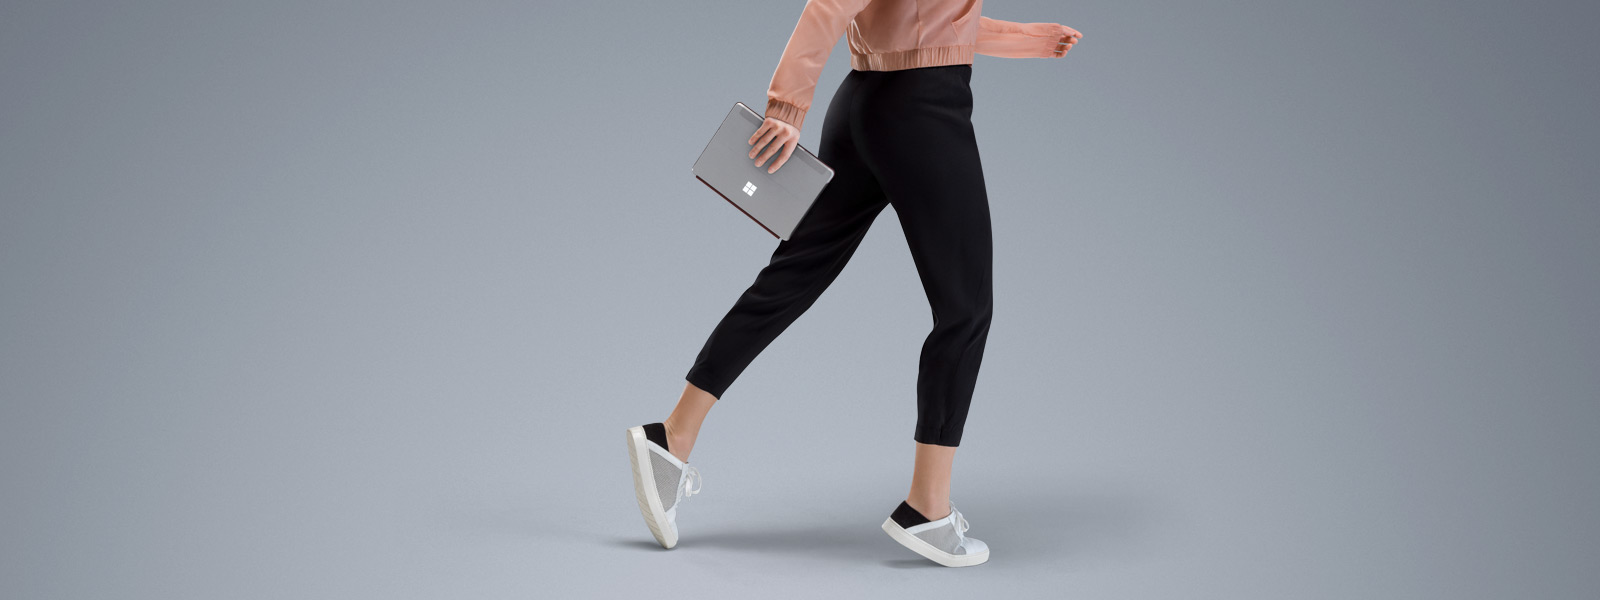 Surface Go held by a girl walking